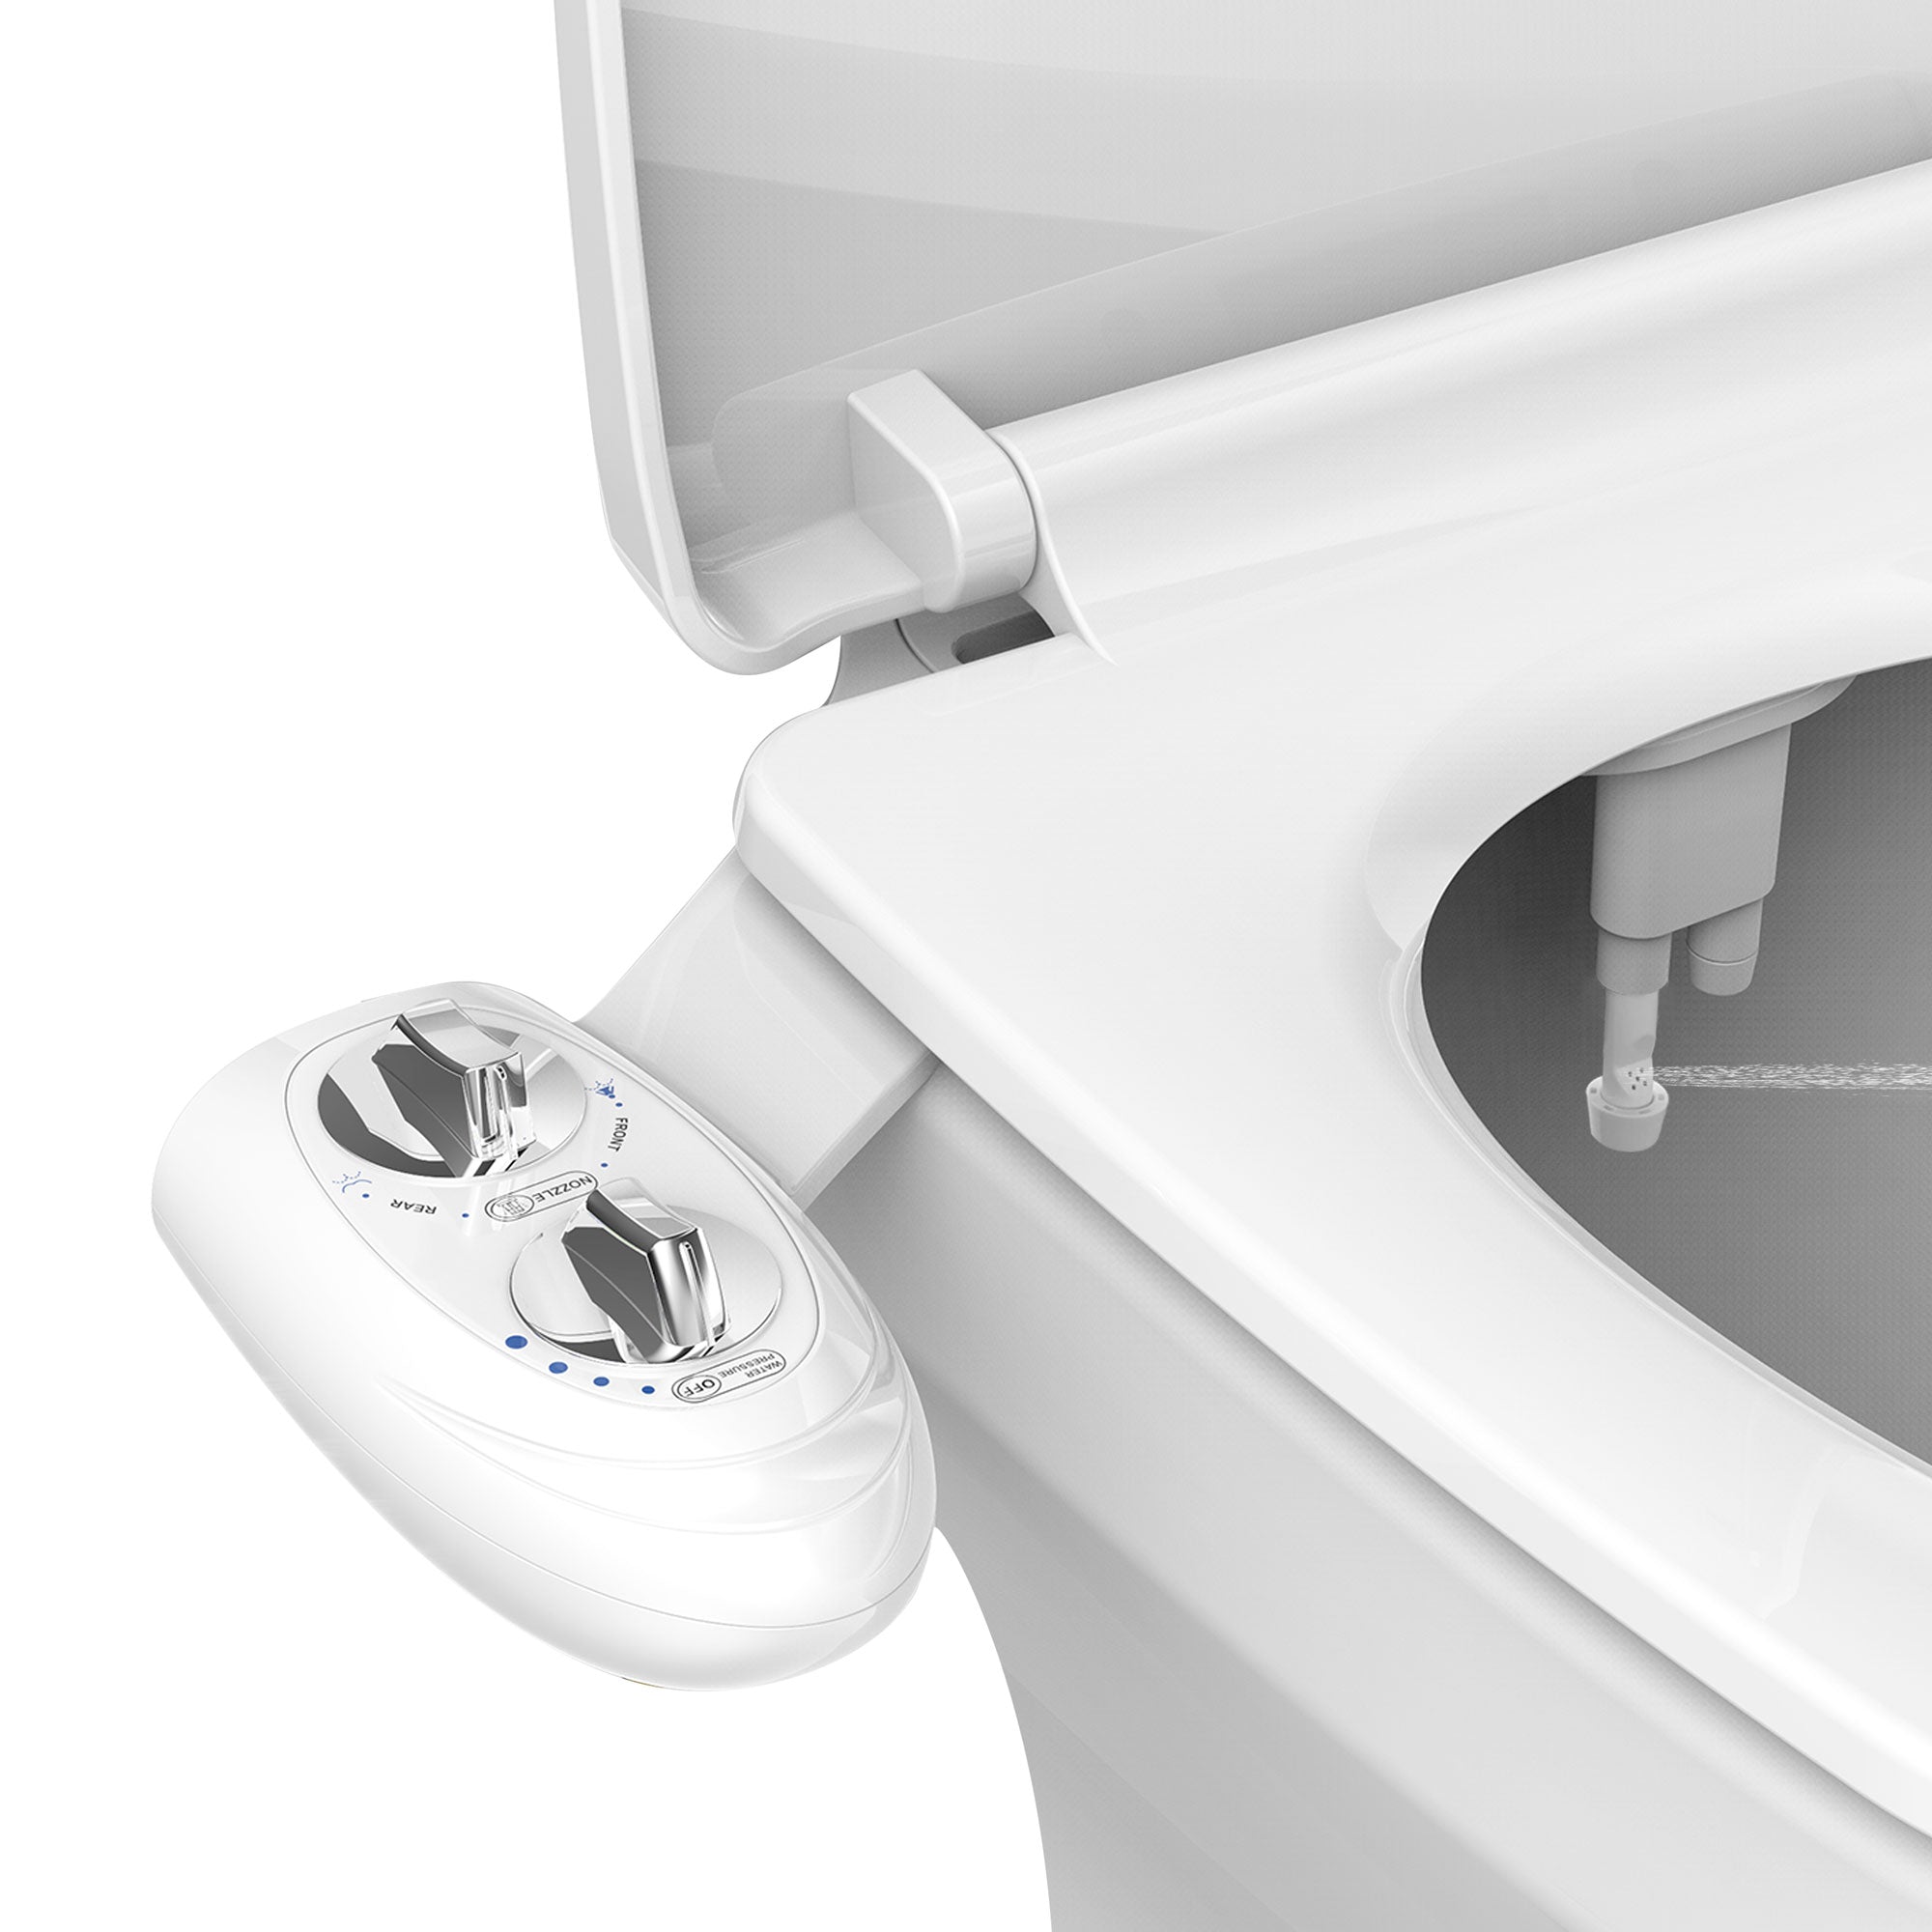 Bidet Toilet Attachment, Non-electric Self Cleaning Sprayer with Dual Nozzles -- BD-2205